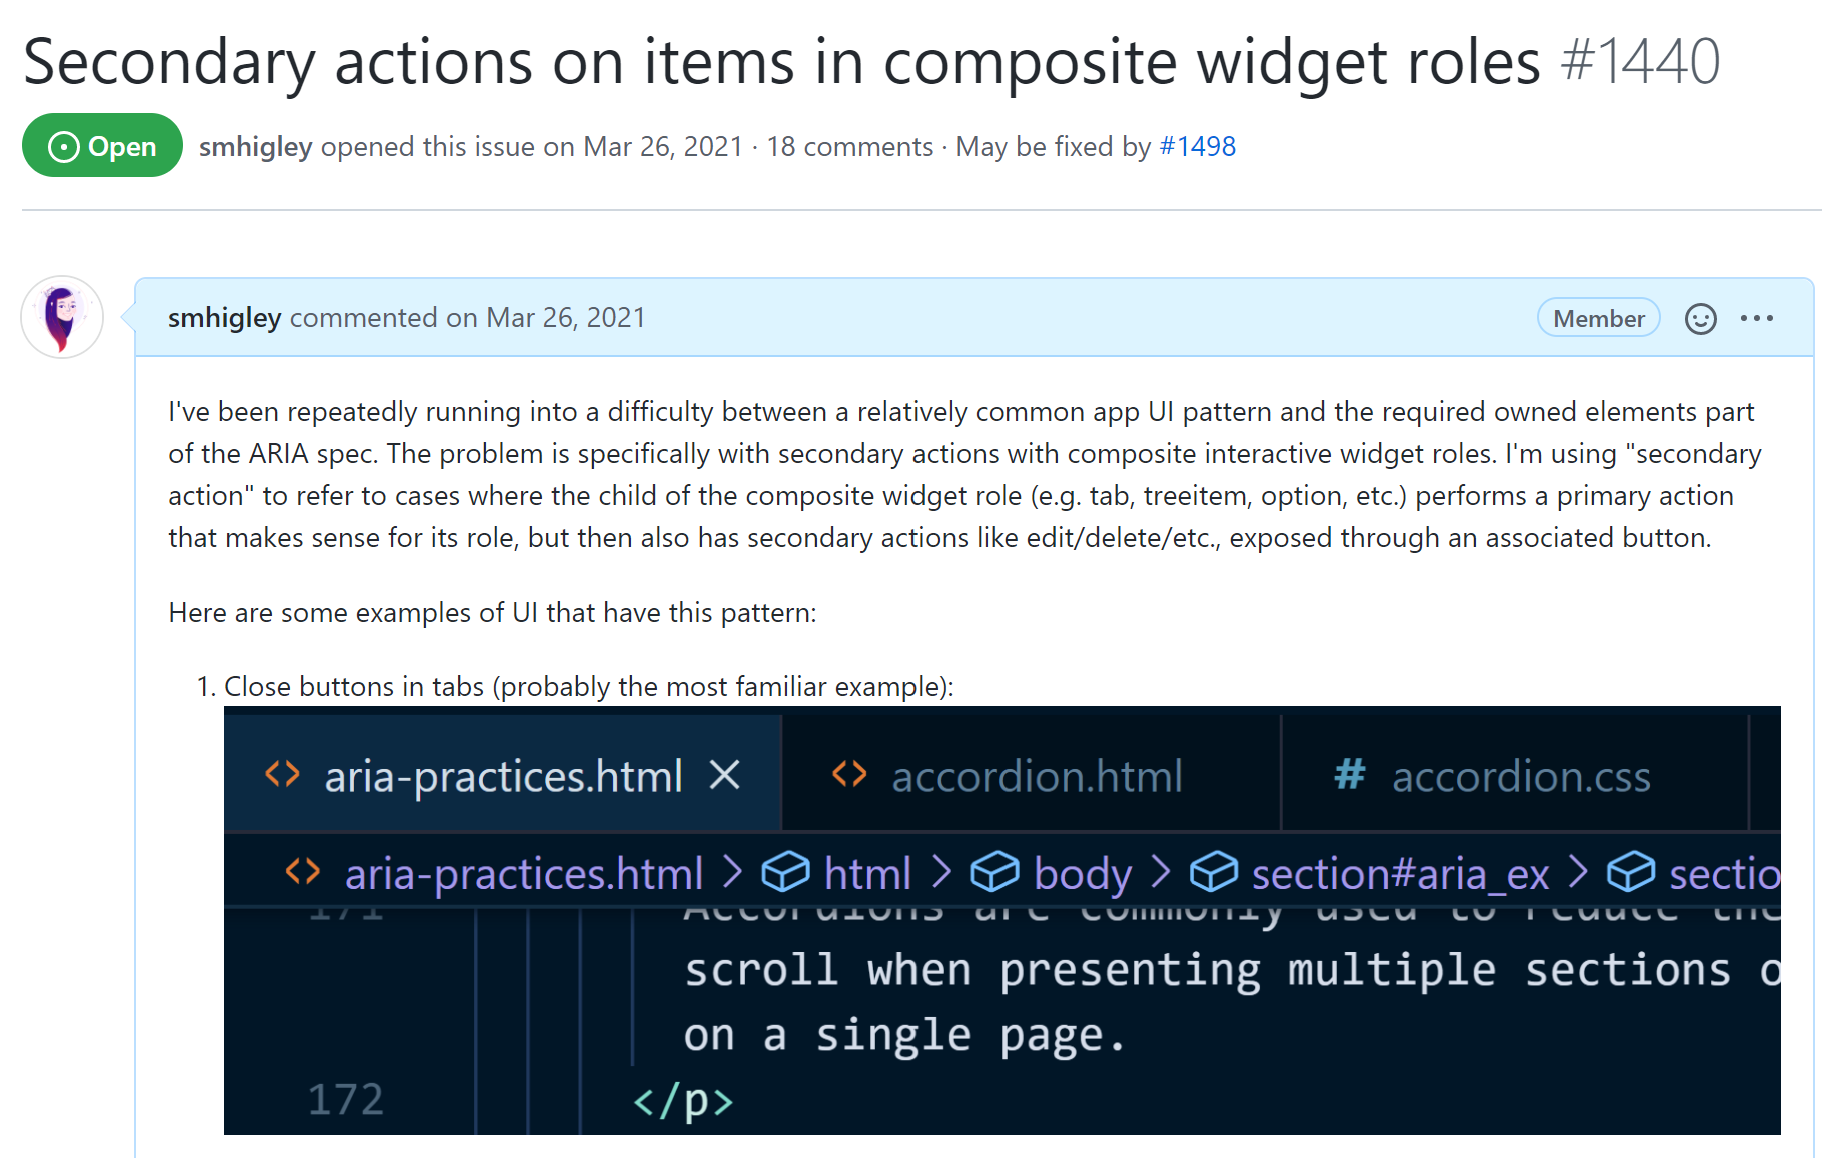 screenshot of a github issue on the ARIA repository for secondary actions on composite issue roles, #1440